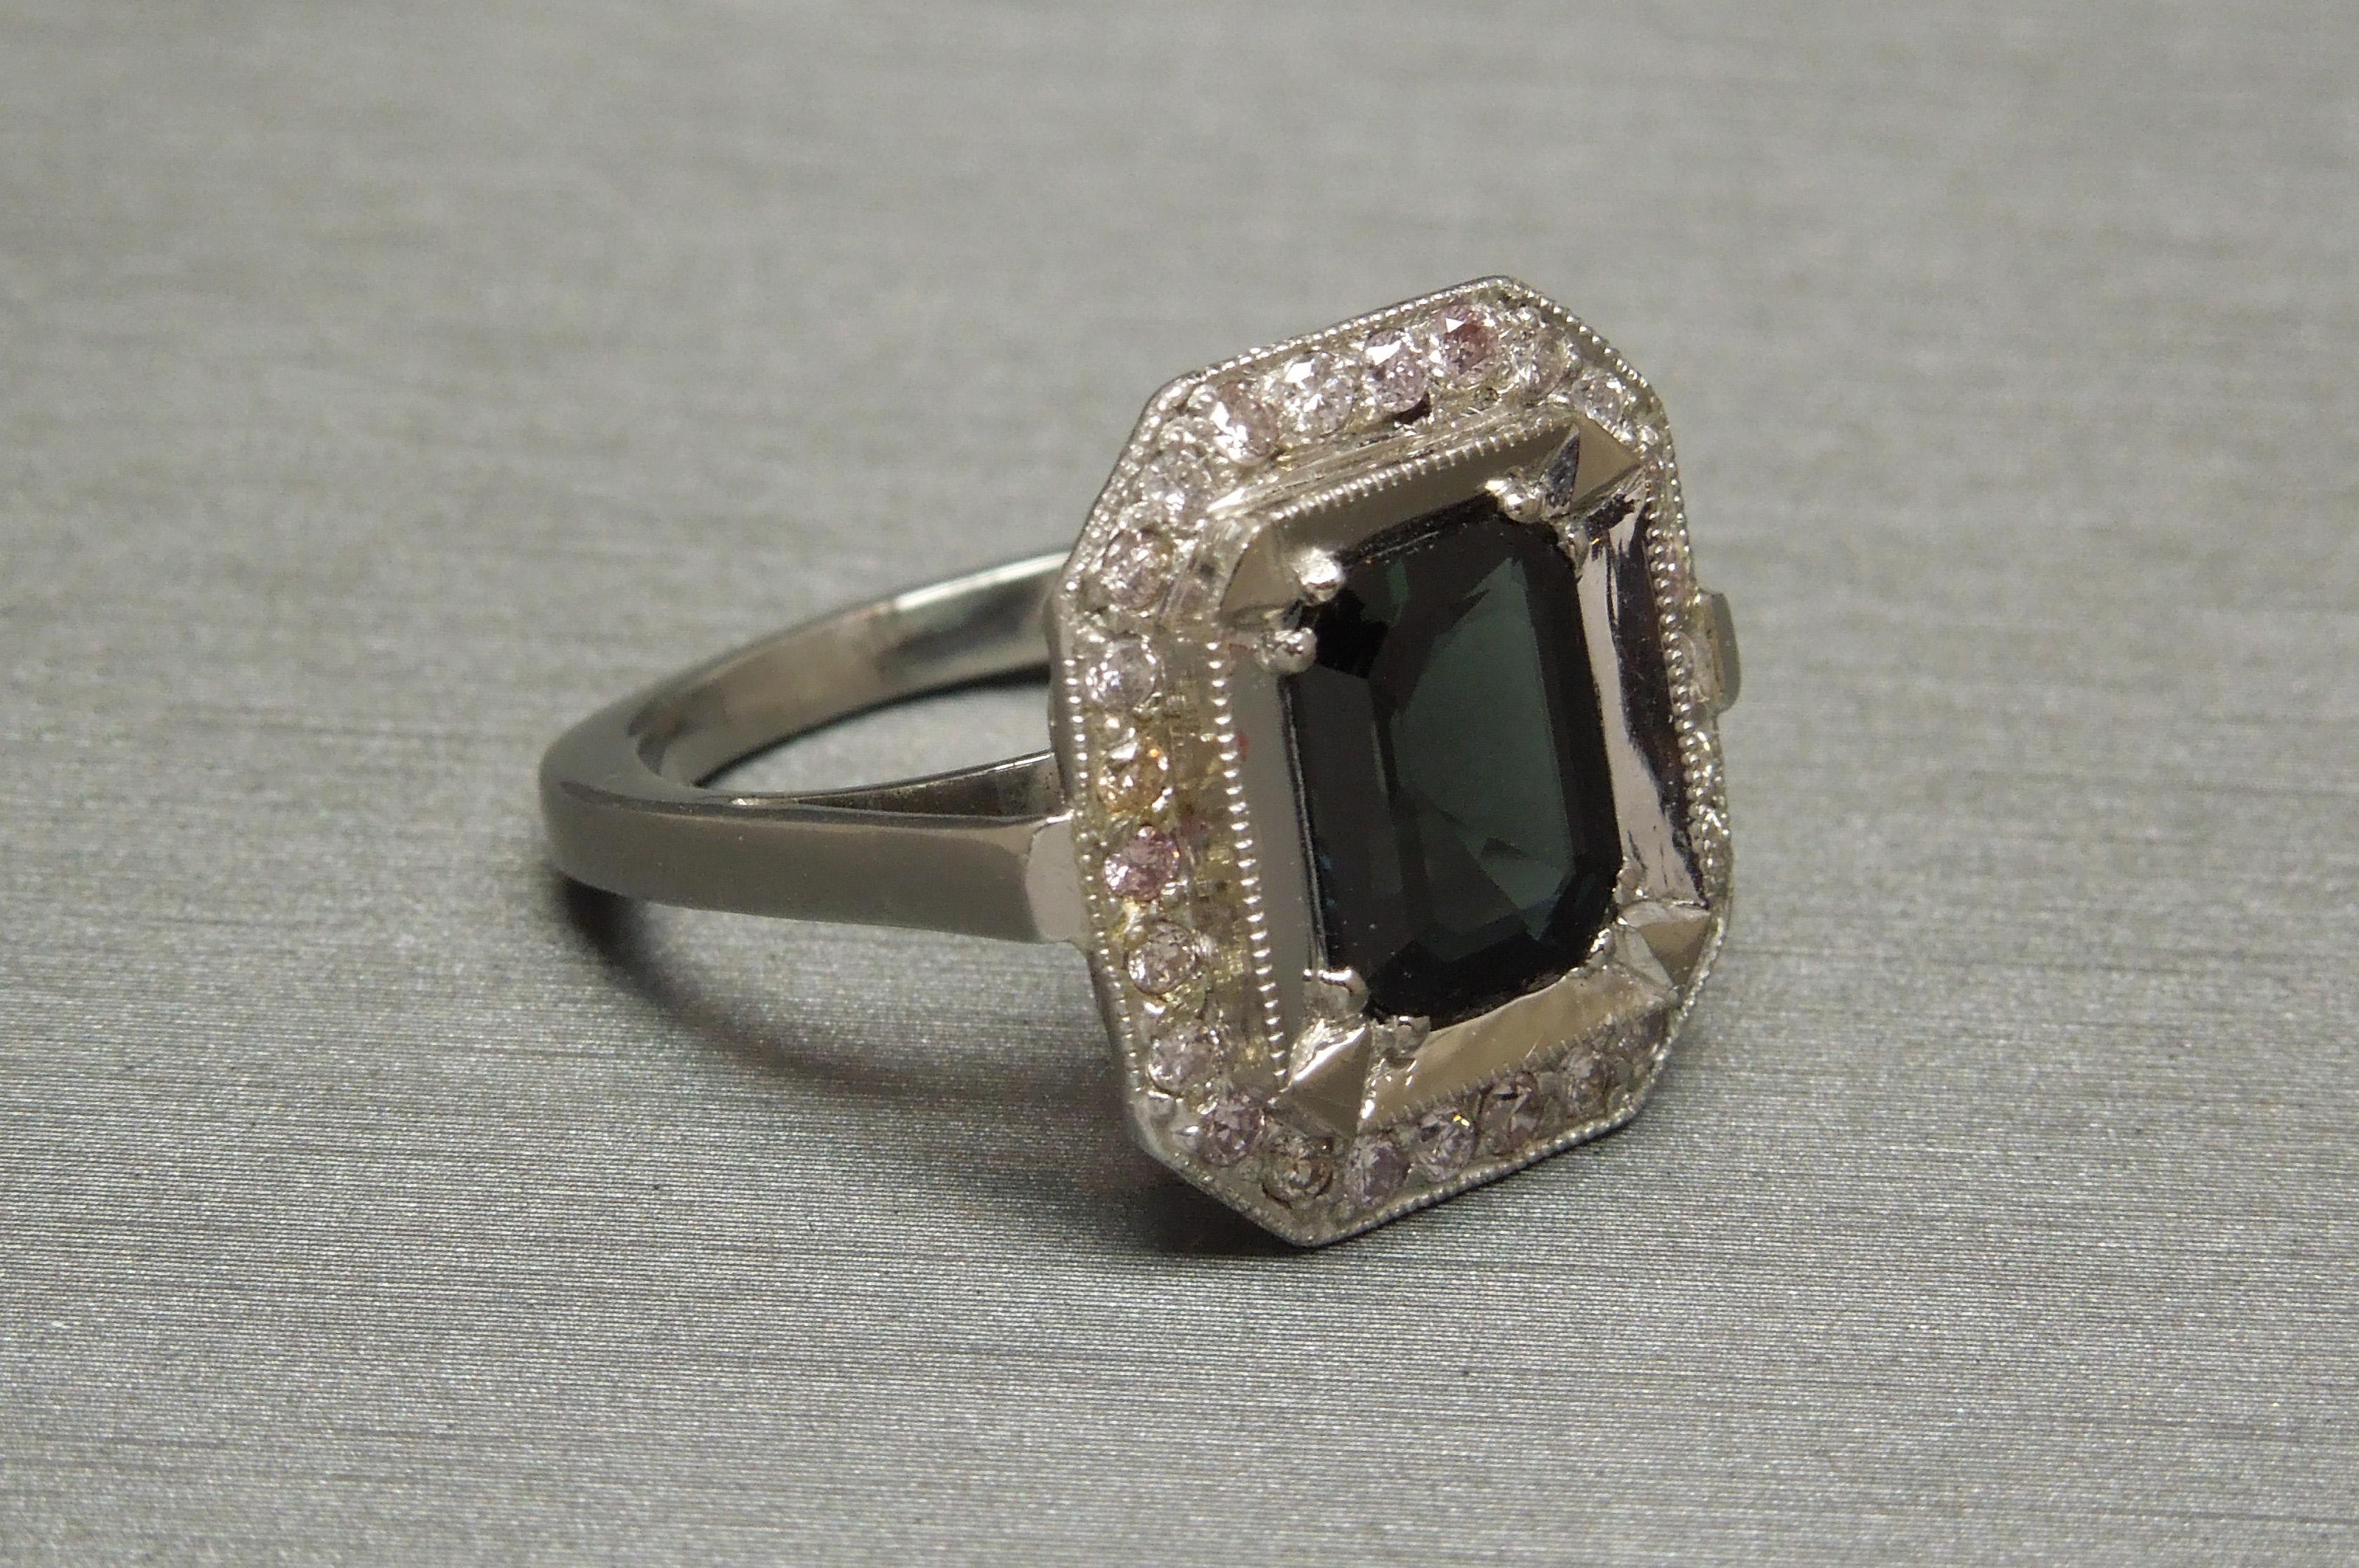 This period Art Deco ring in a combination of White Gold & Platinum features an Elegant central 2.85 carat Emerald cut Natural Blue Sapphire measuring 9.1mm x 7.2mm bordered by a total of 0.65 carats of Natural Light Pink Round Brilliant cuts